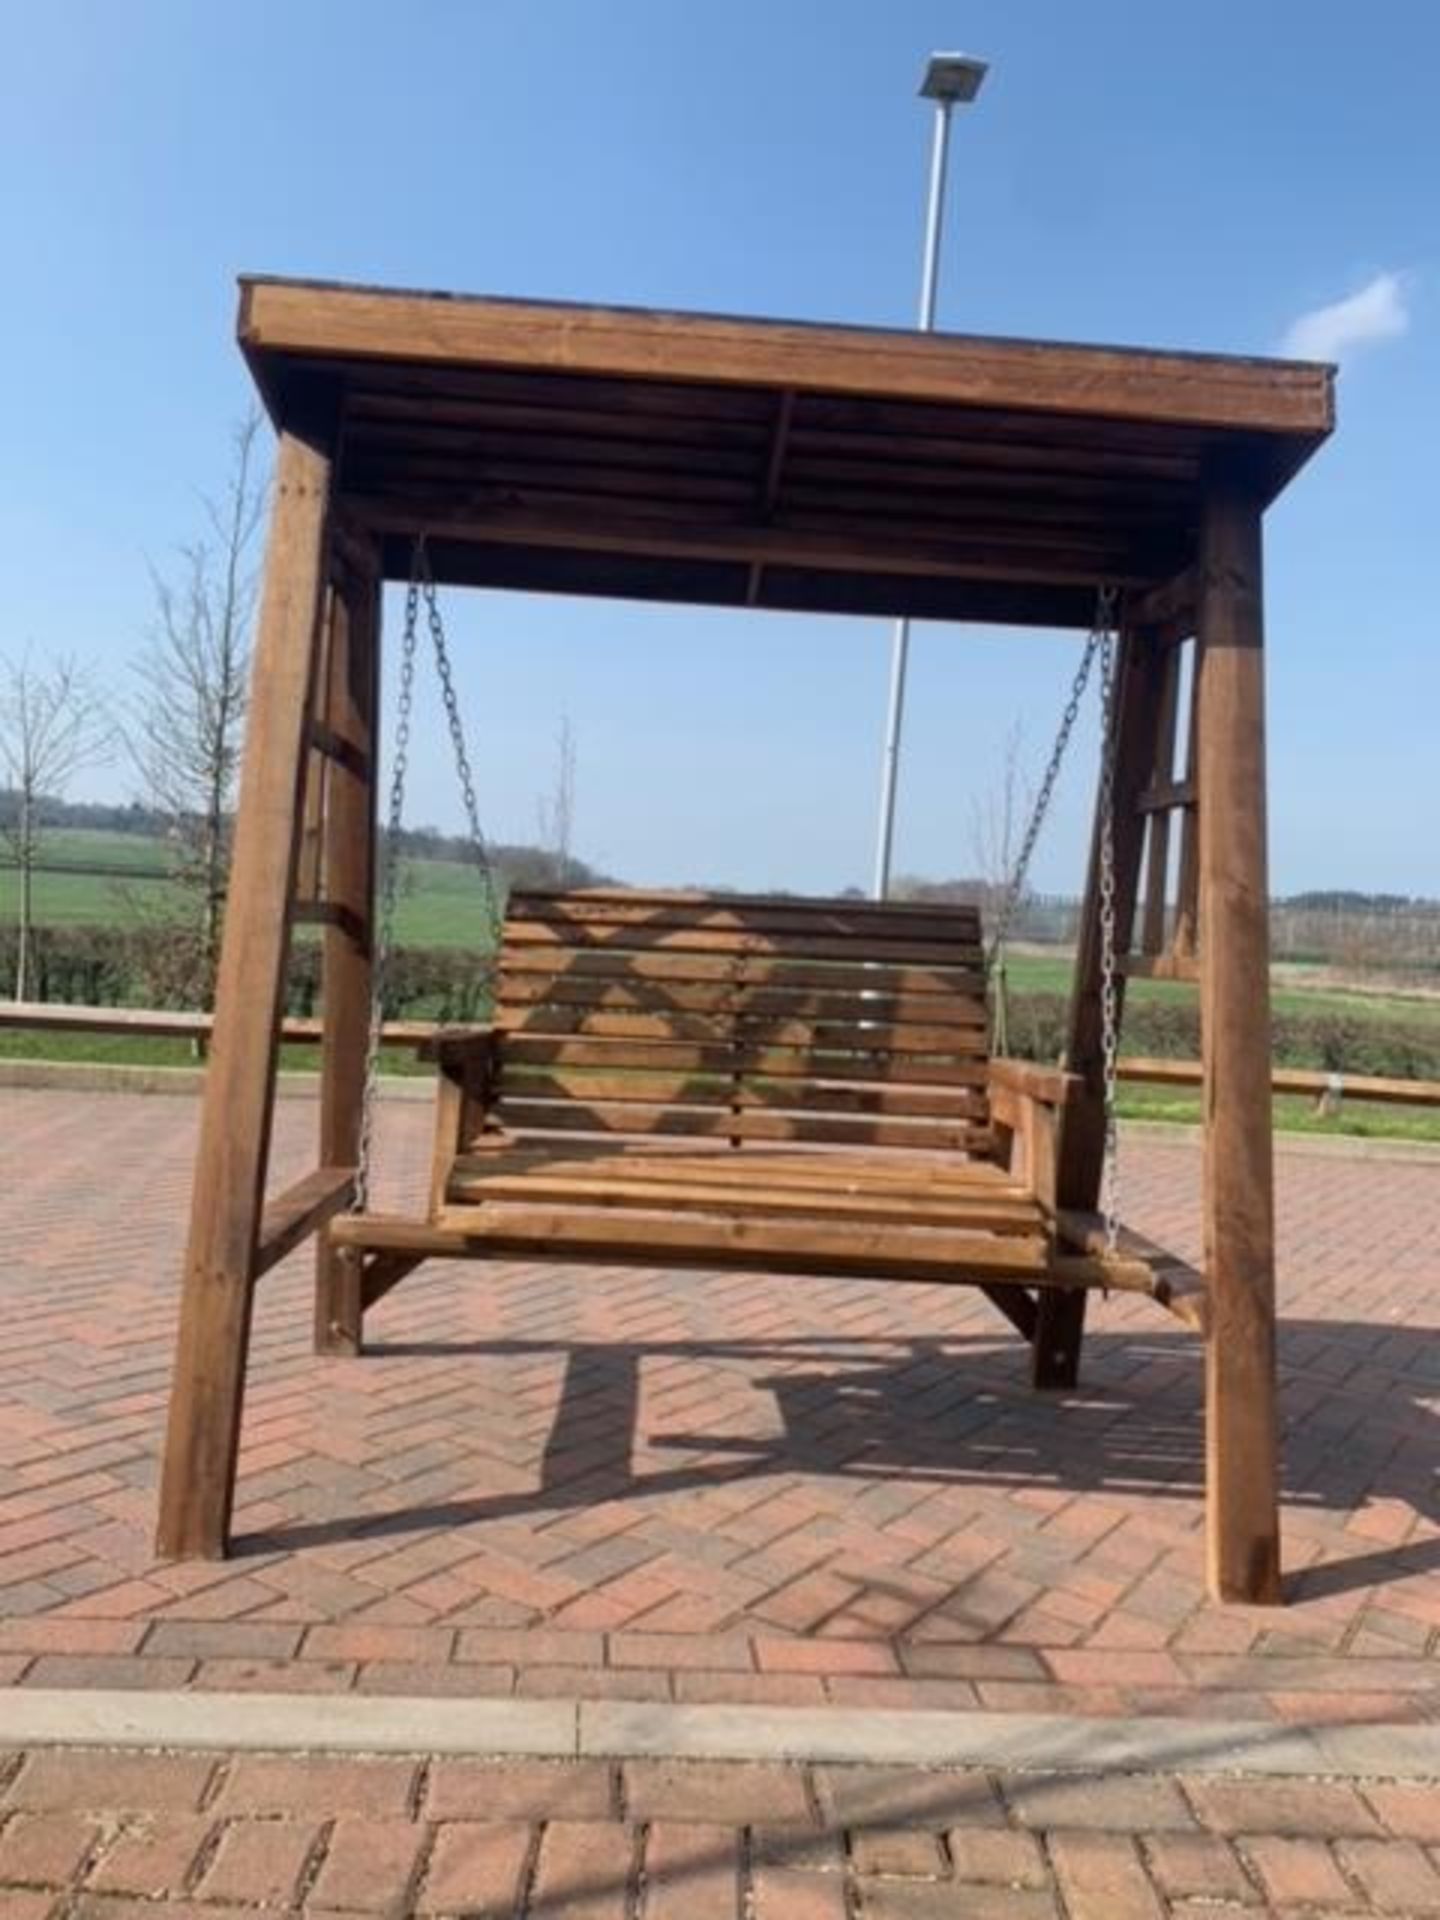 RW - BRAND NEW QUALITY Swing bench Handcrafted Garden Furniture. 2 Seater Swing bench *NO VAT* - Image 3 of 3